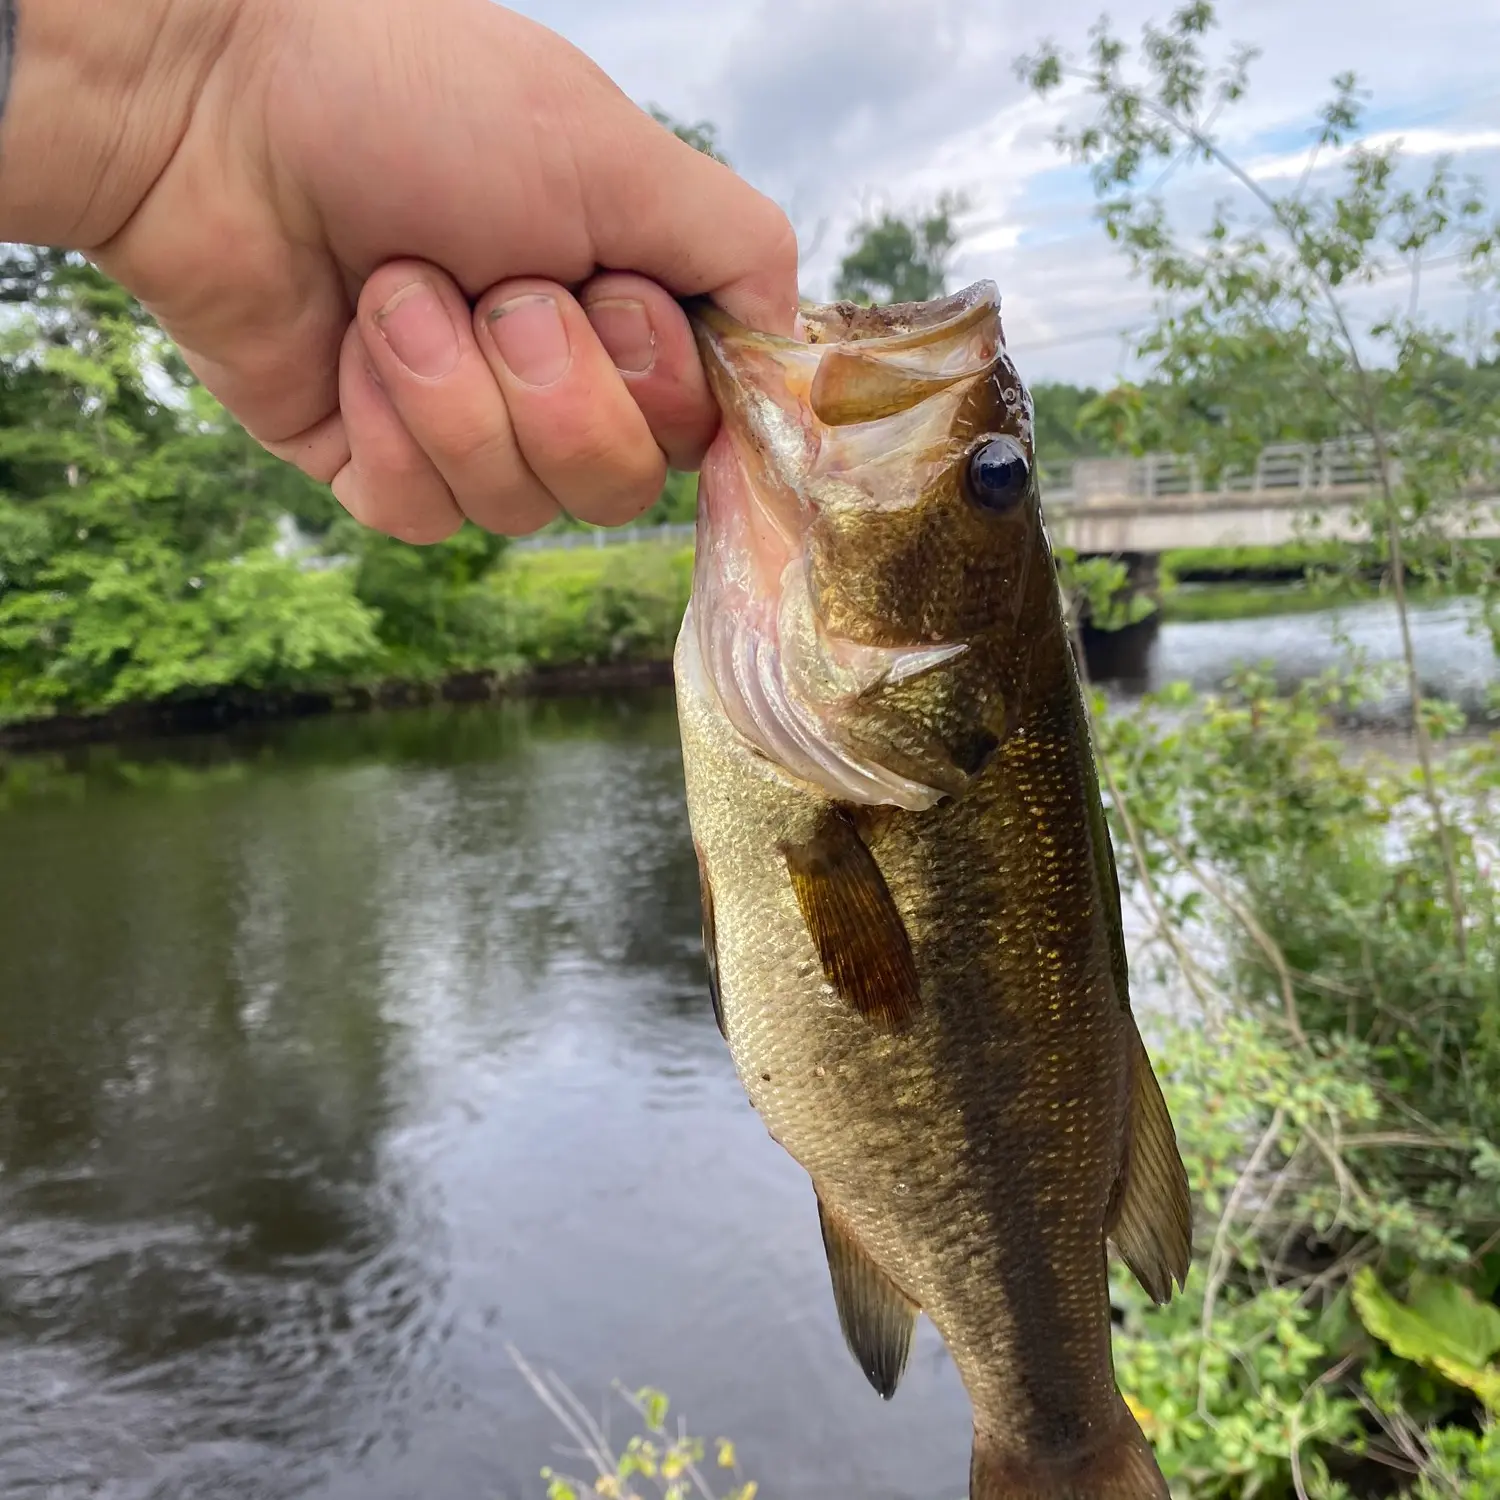 ᐅ Acme Pond fishing reports🎣• Webster, CT (United States) fishing